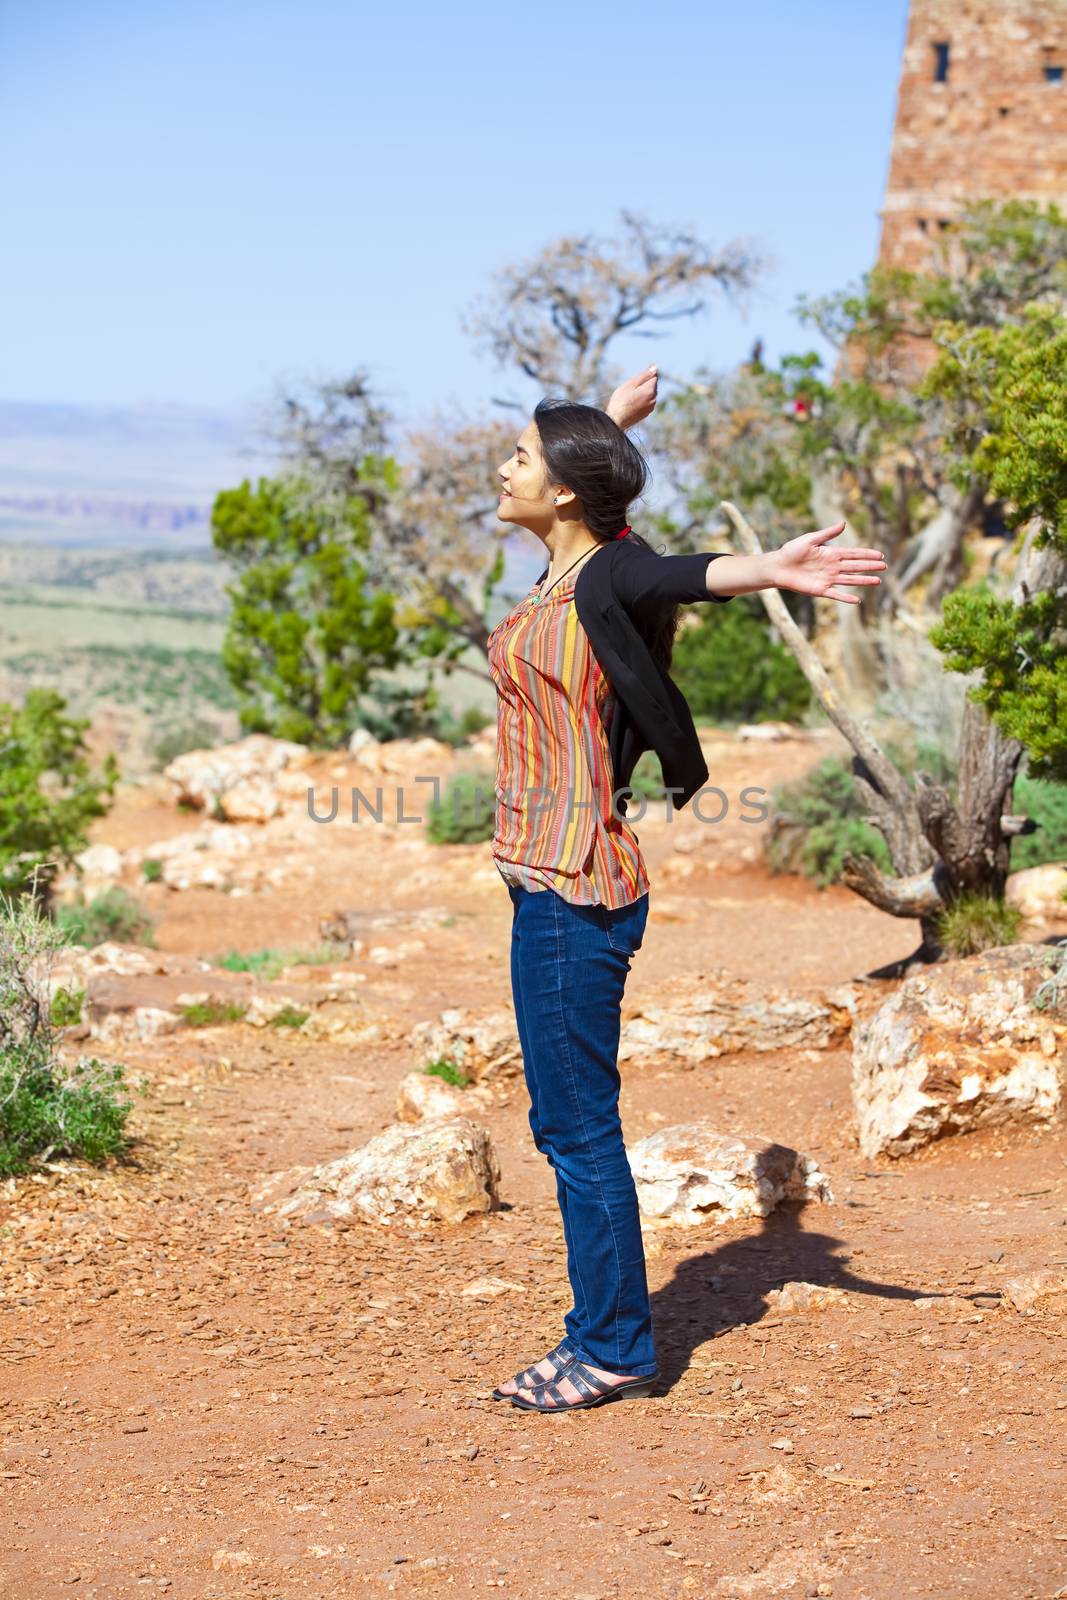 Biracial teen girl raising arms in praise at the Grand Canyon by jarenwicklund